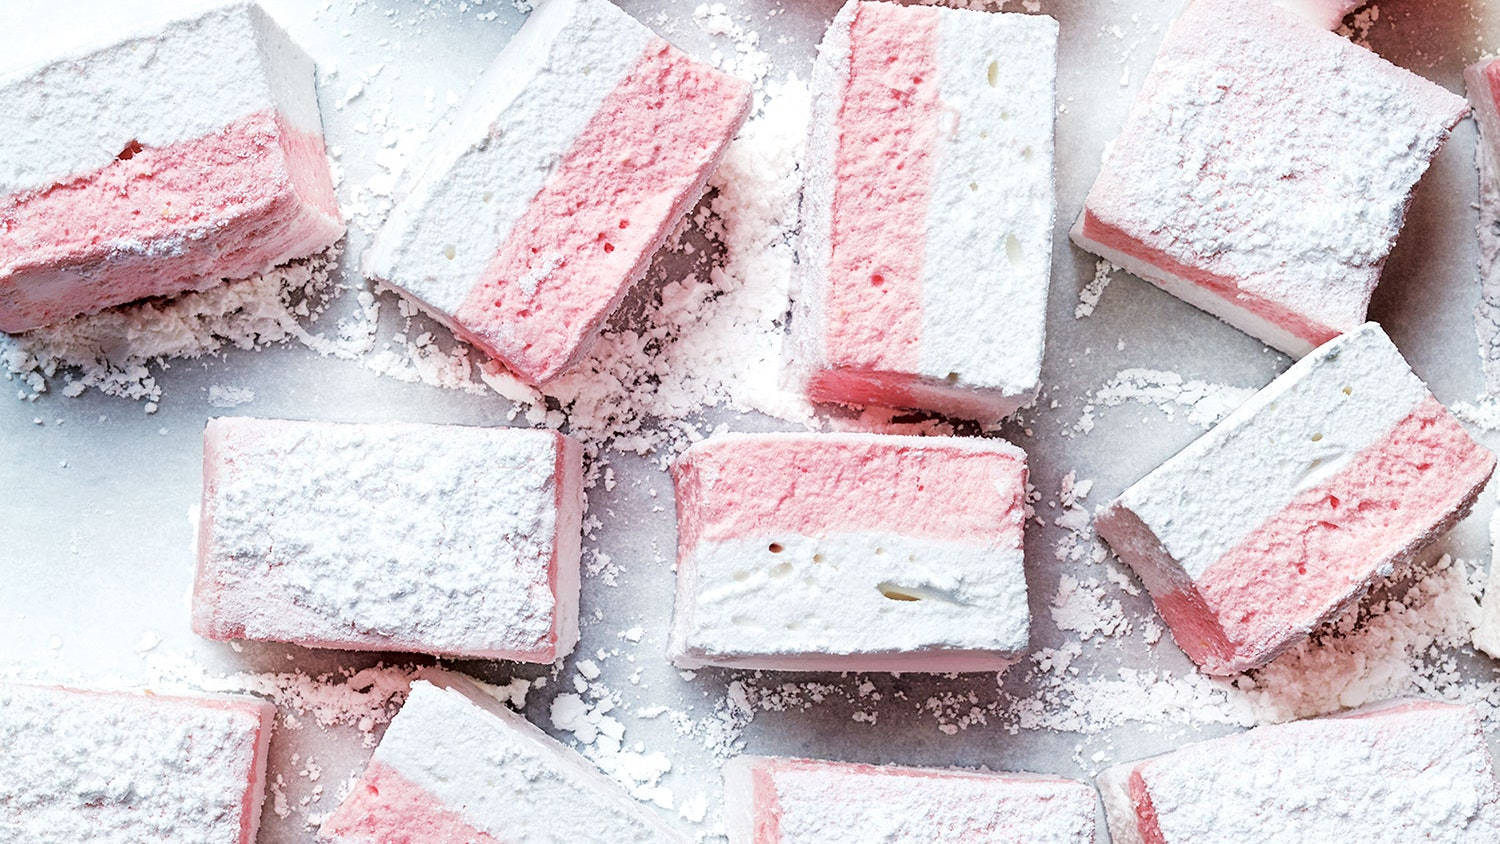 Gourmet Blood Orange Coconut Marshmallows on a Plate Wallpaper